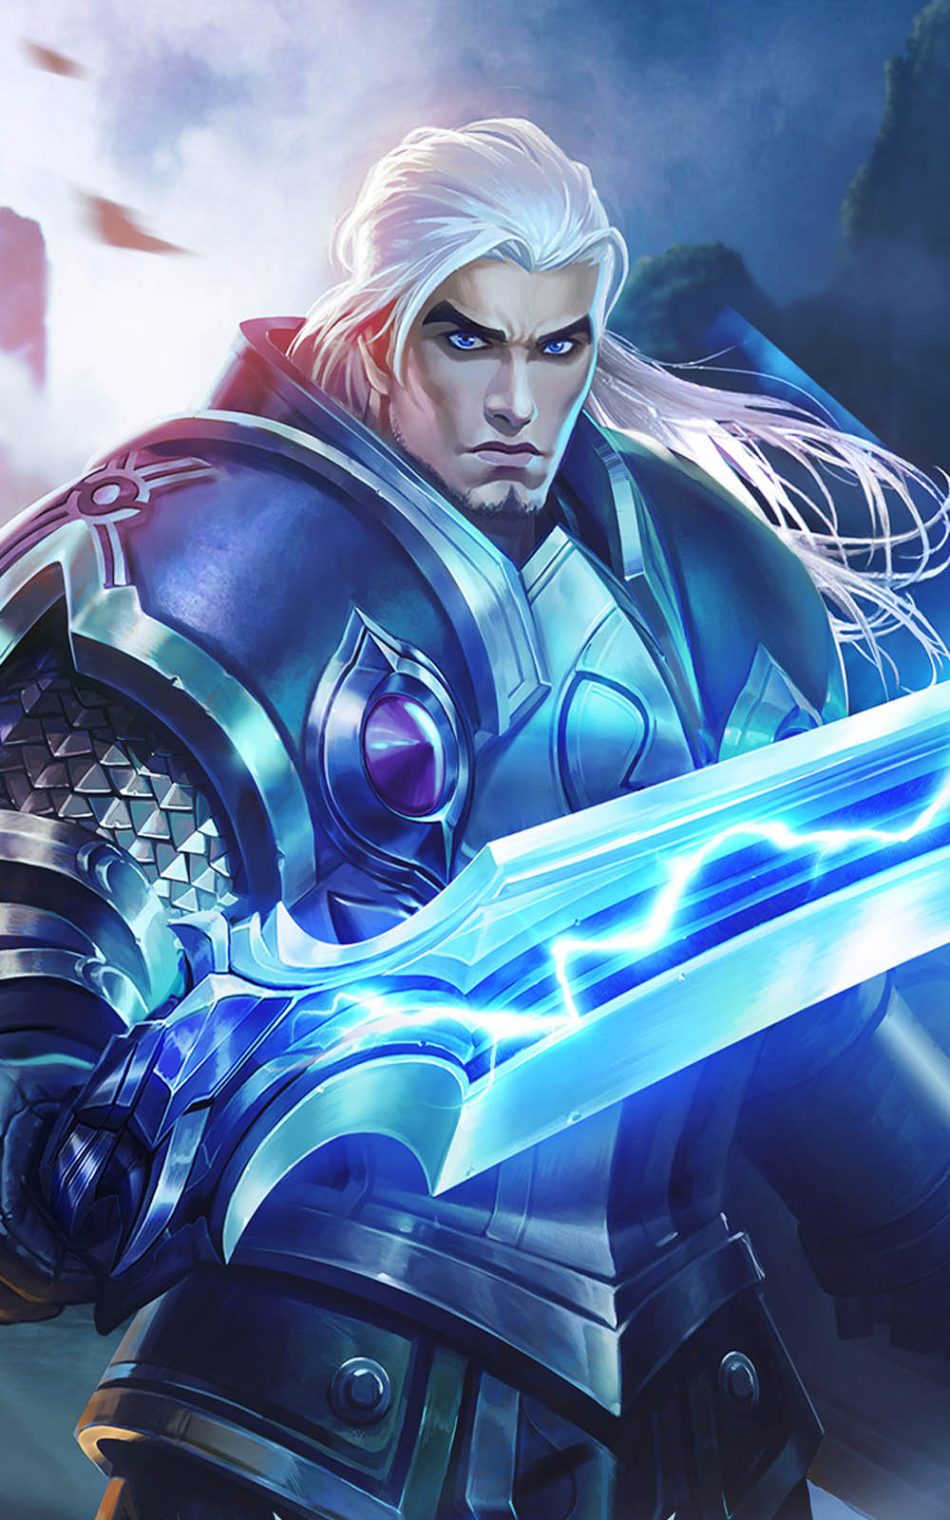 Download Tigreal Mobile Legends Hero Free Pure 4K Ultra HD Mobile